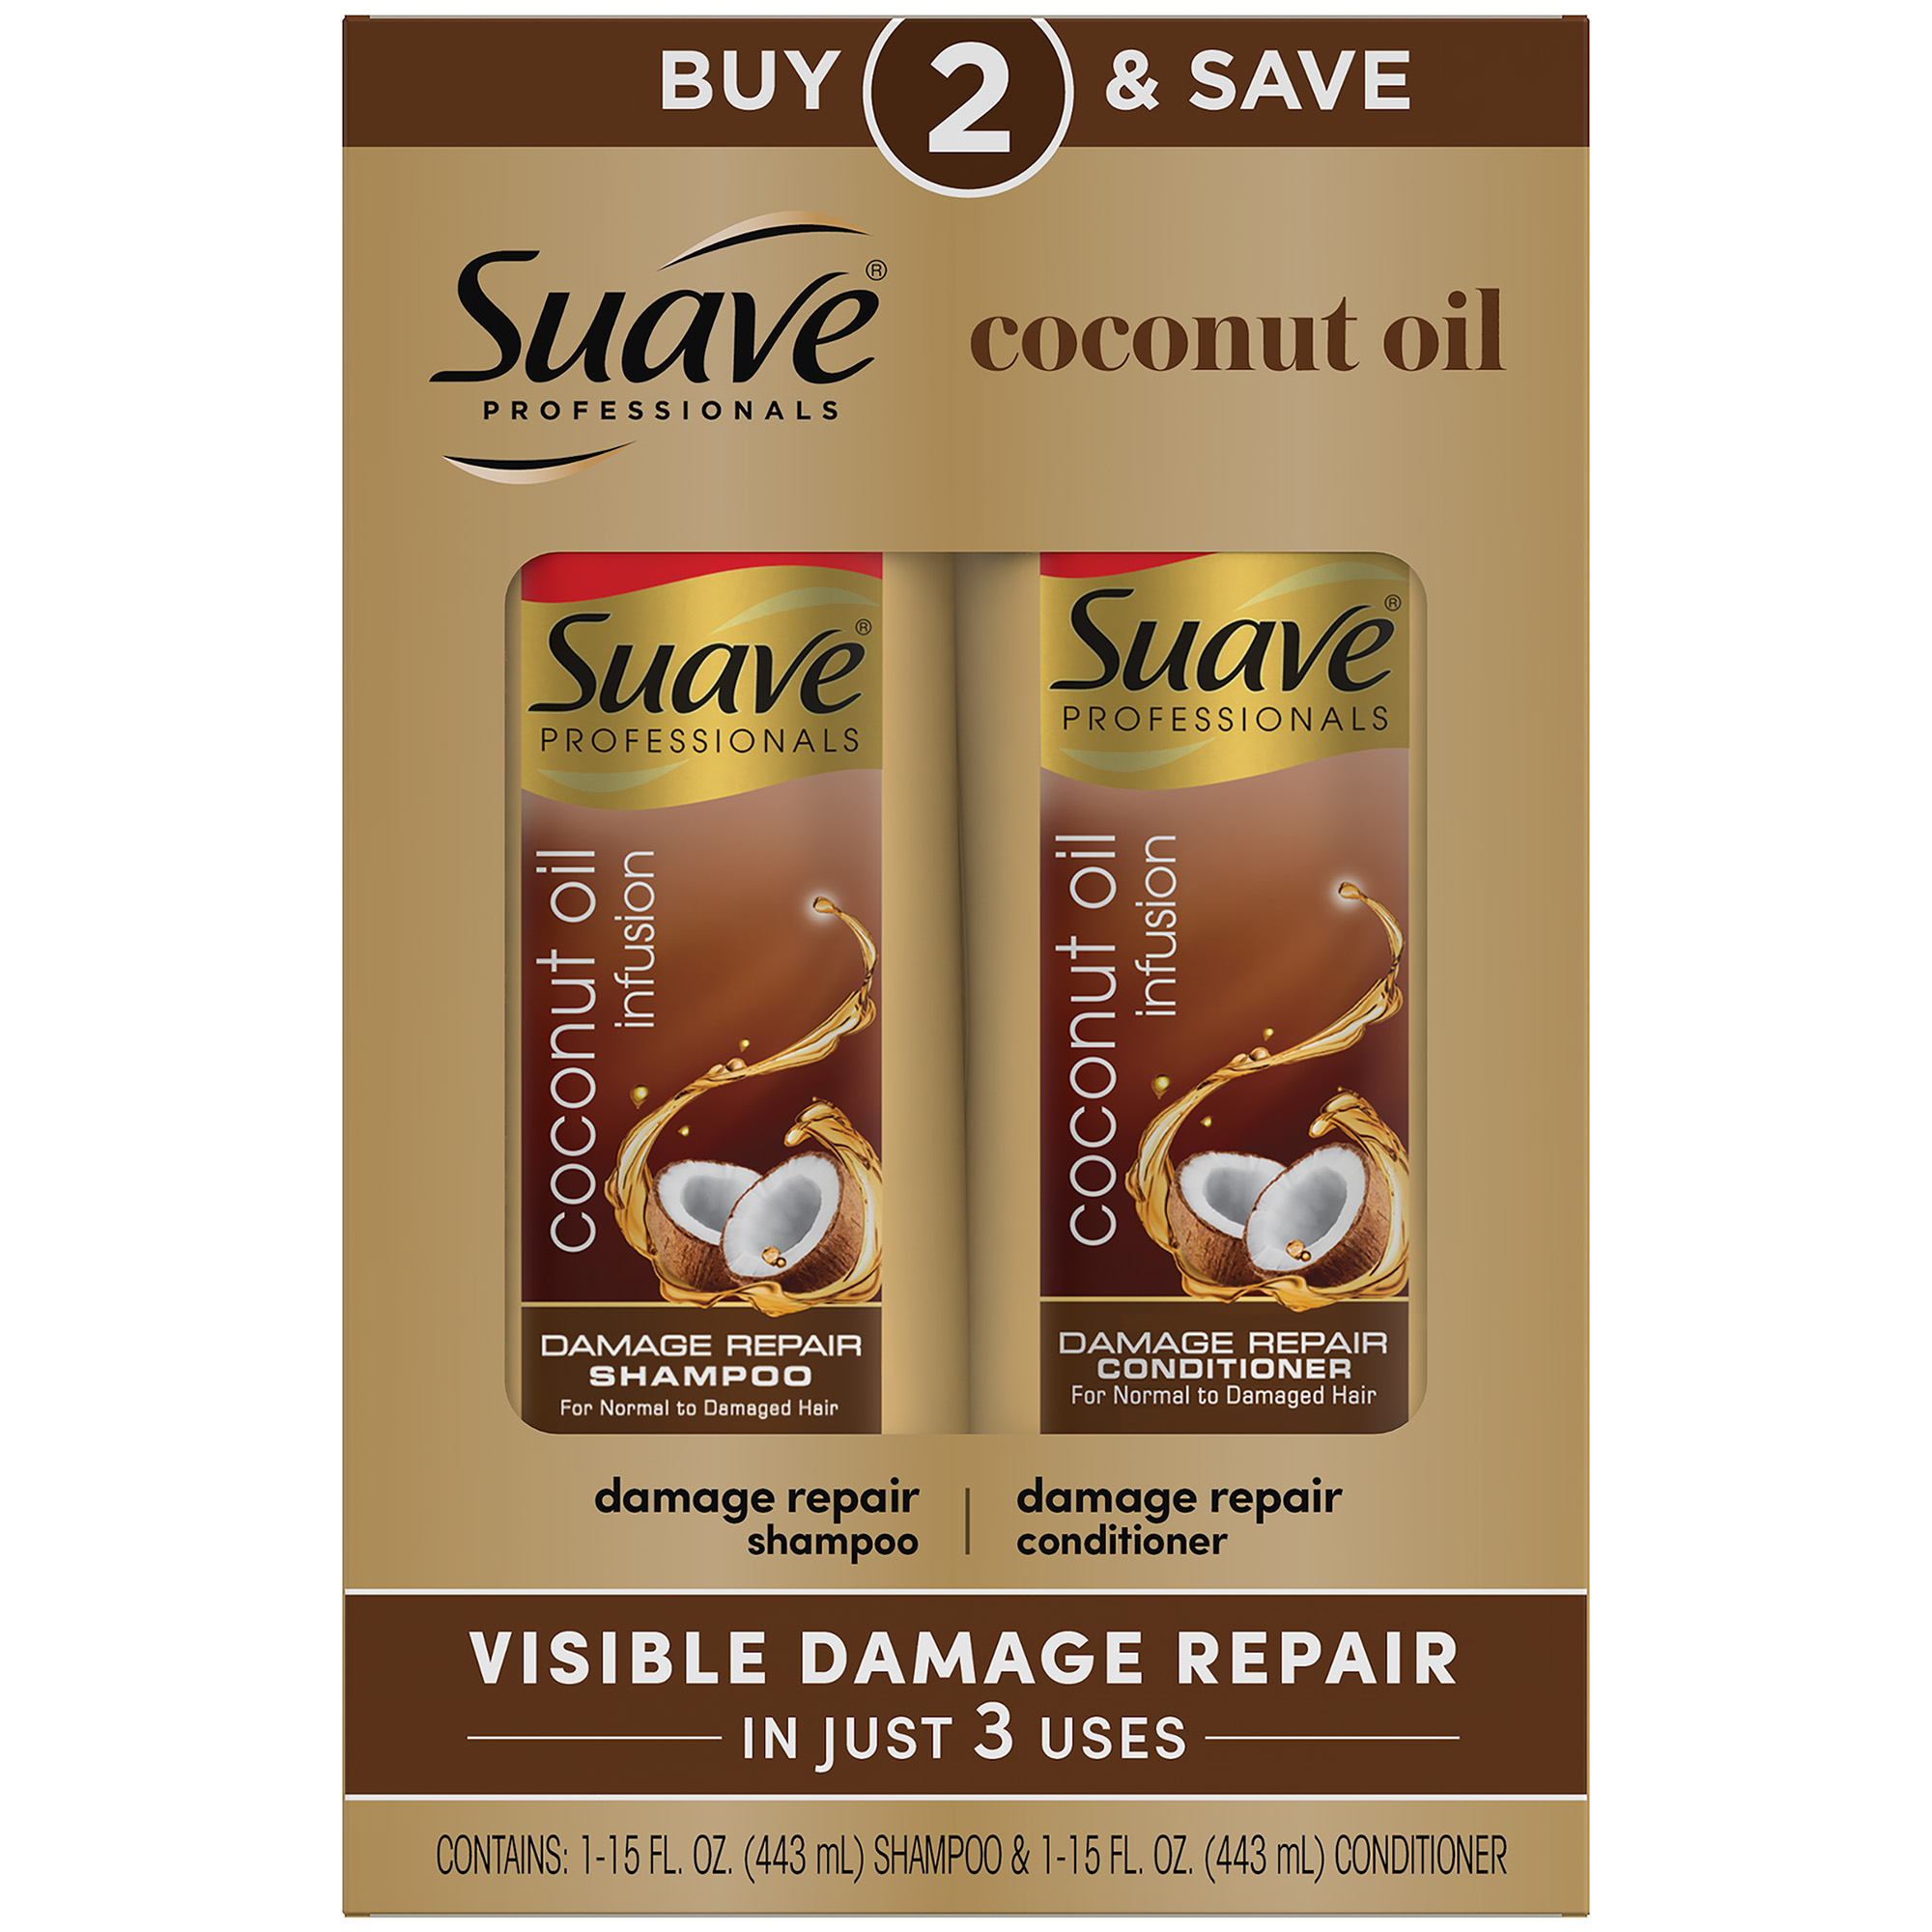 Suave Professionals Moisturizing Repairing Daily Shampoo & Conditioner with Coconut Oil, Full Size Set, 2 Pack - image 1 of 9